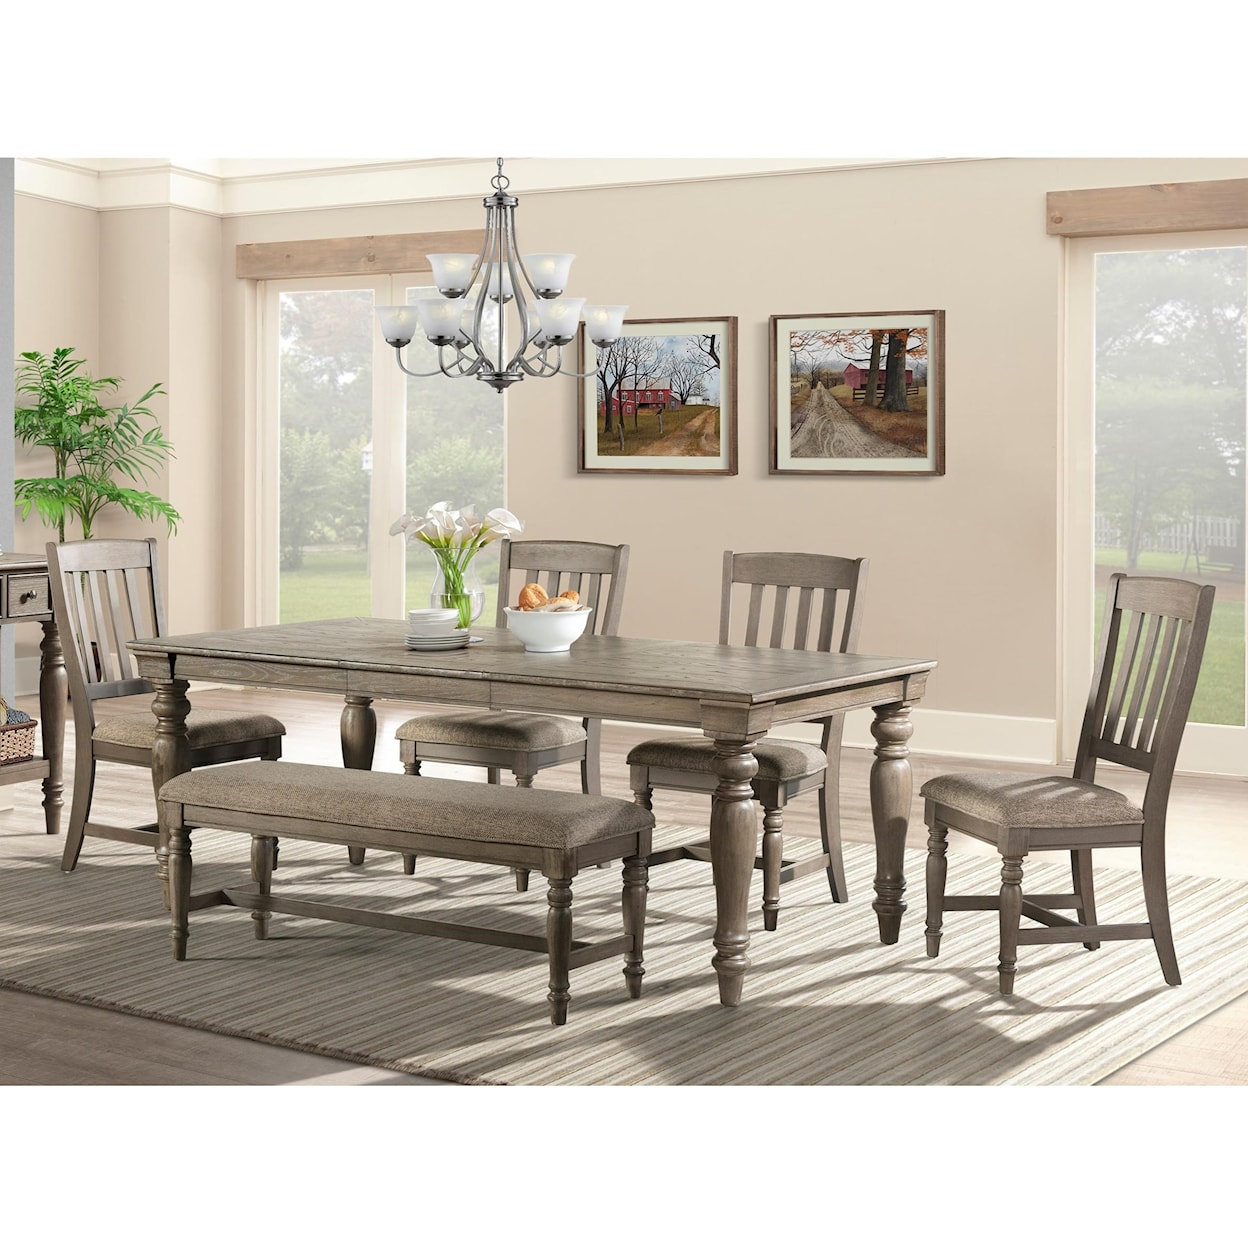 Intercon Balboa Park Table and Chair Set with Bench